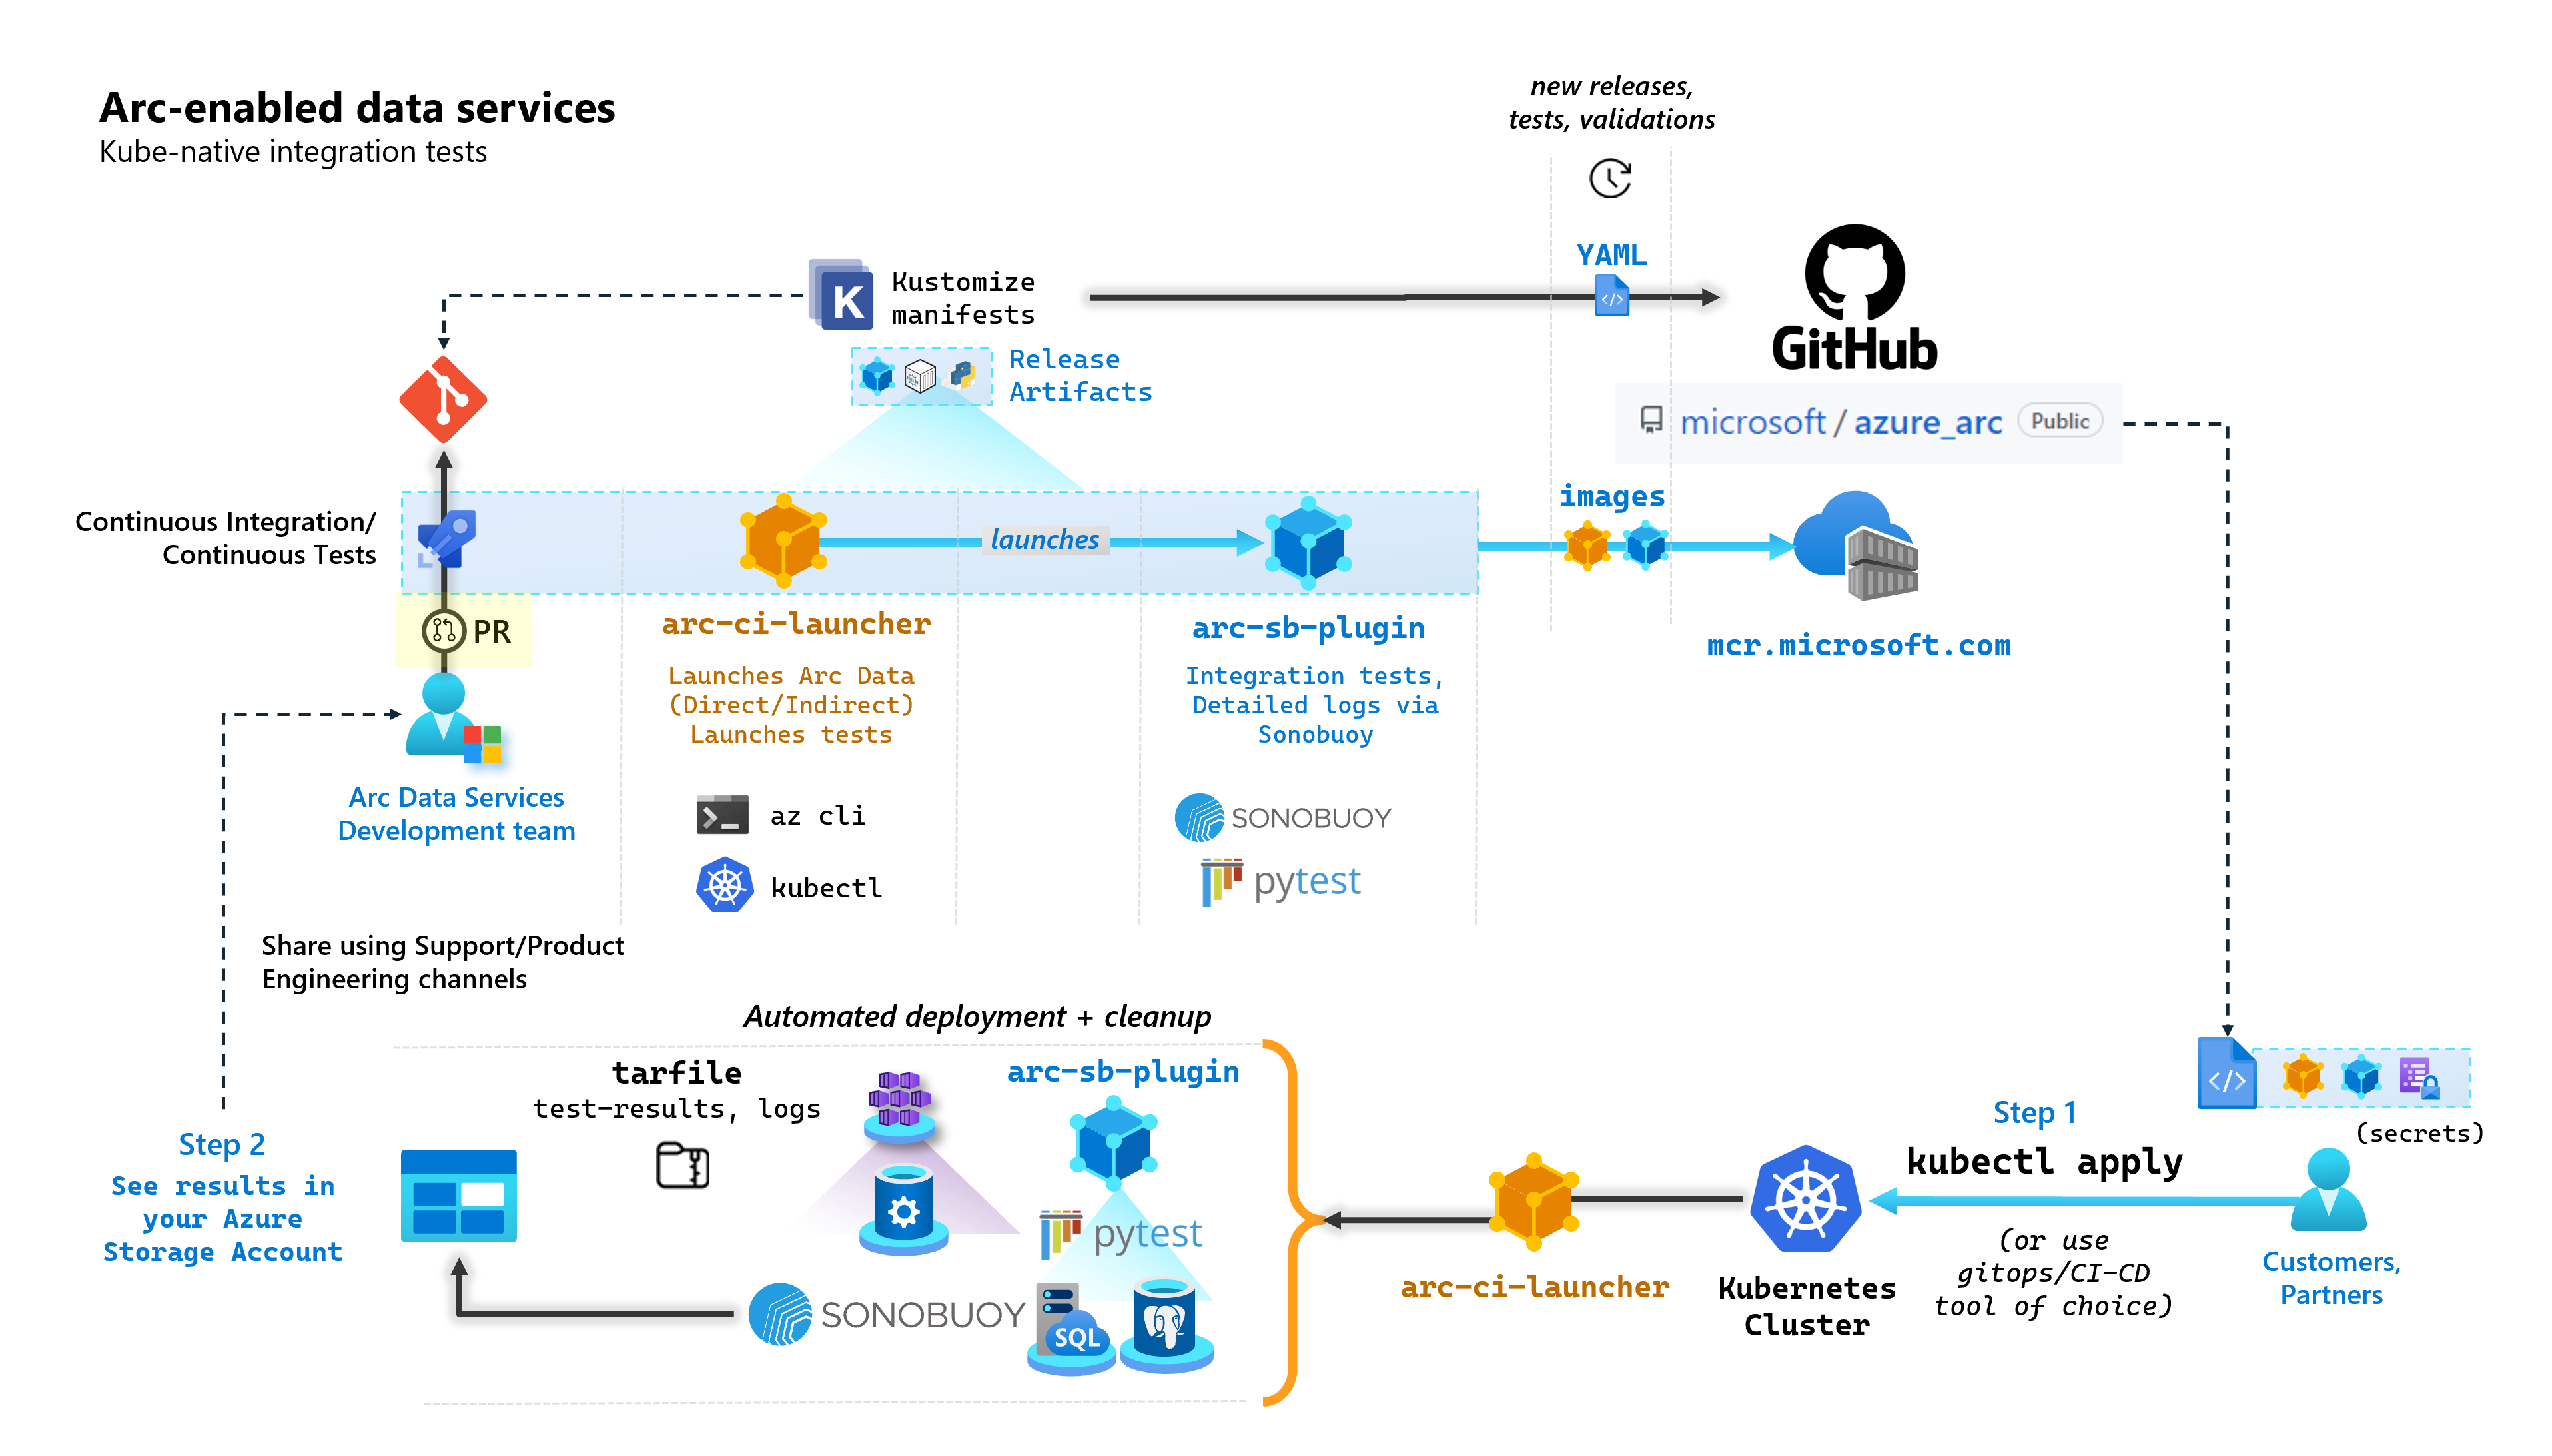 Diagram that shows the Arc-enabled data services Kube-native integration tests.